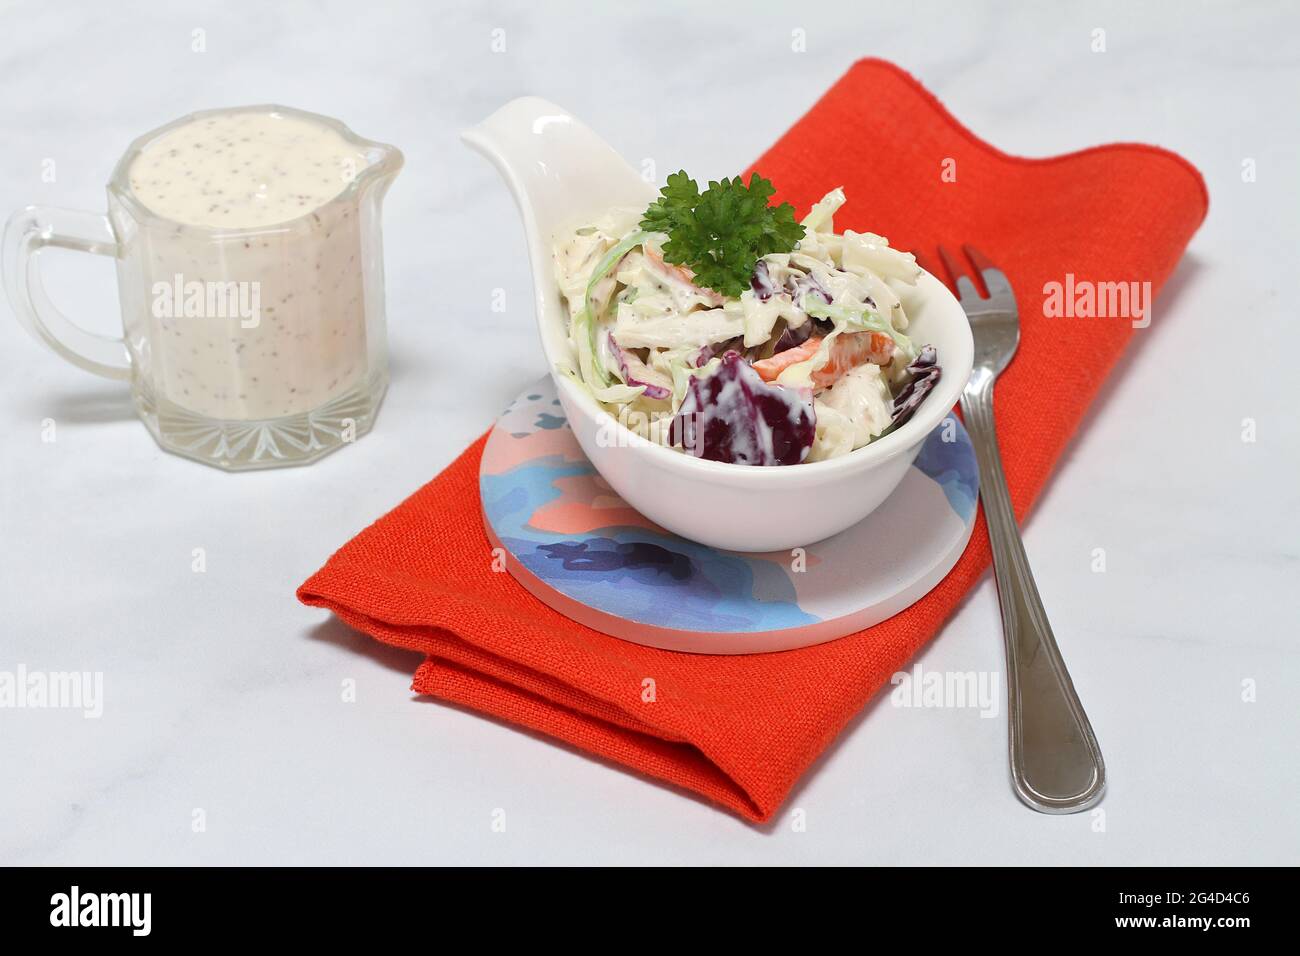 Fresh, organic cole slaw in a handled dish with pitcher of dressing on the side.  Macro view. Stock Photo